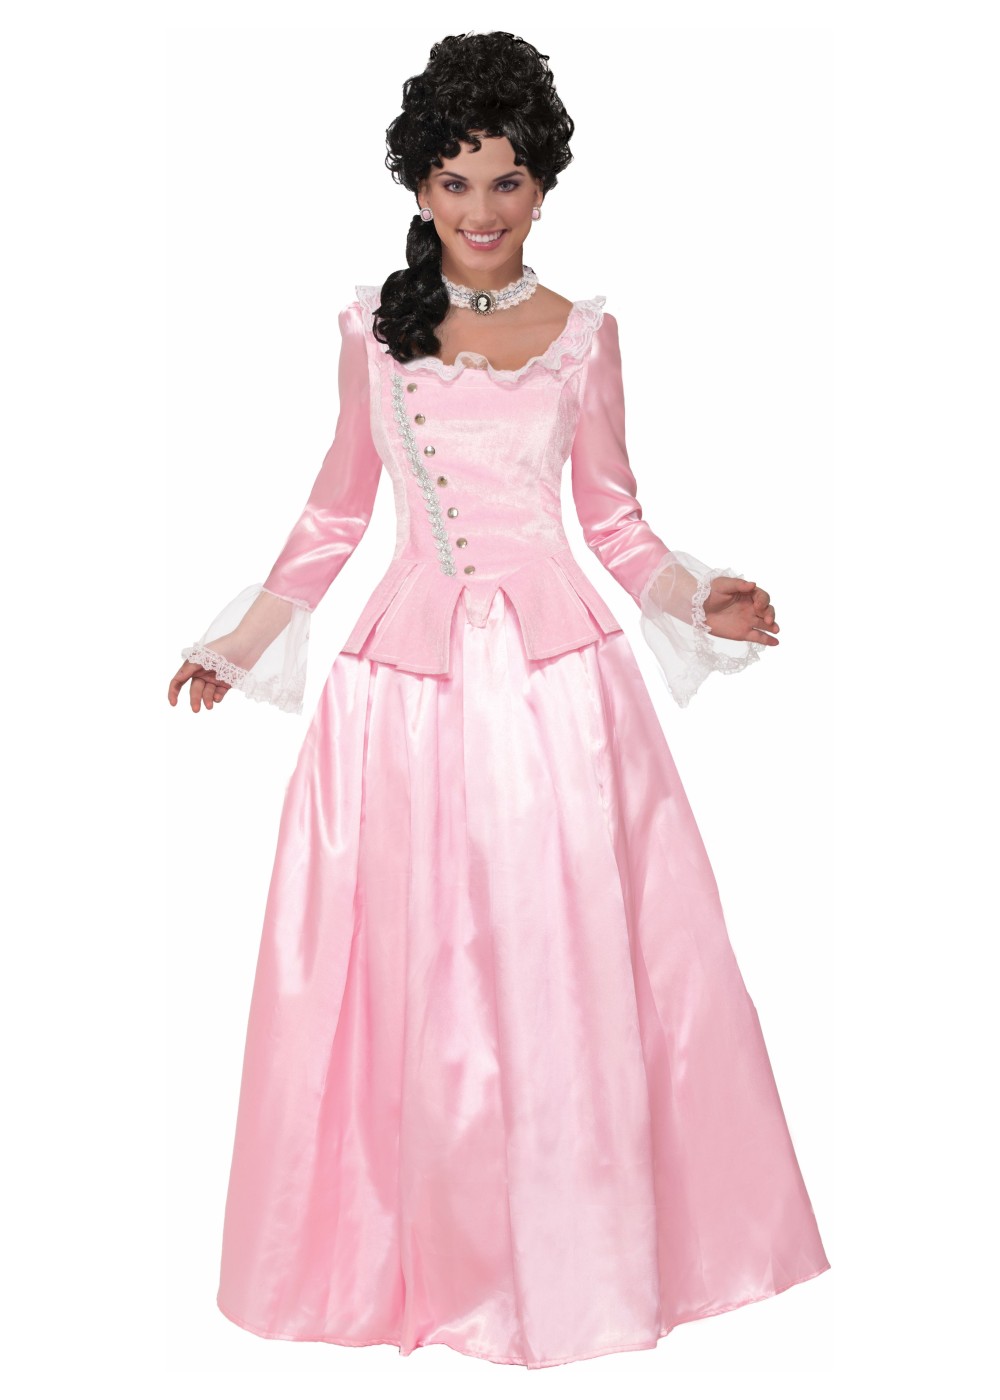 Colonial Maiden Women Costume